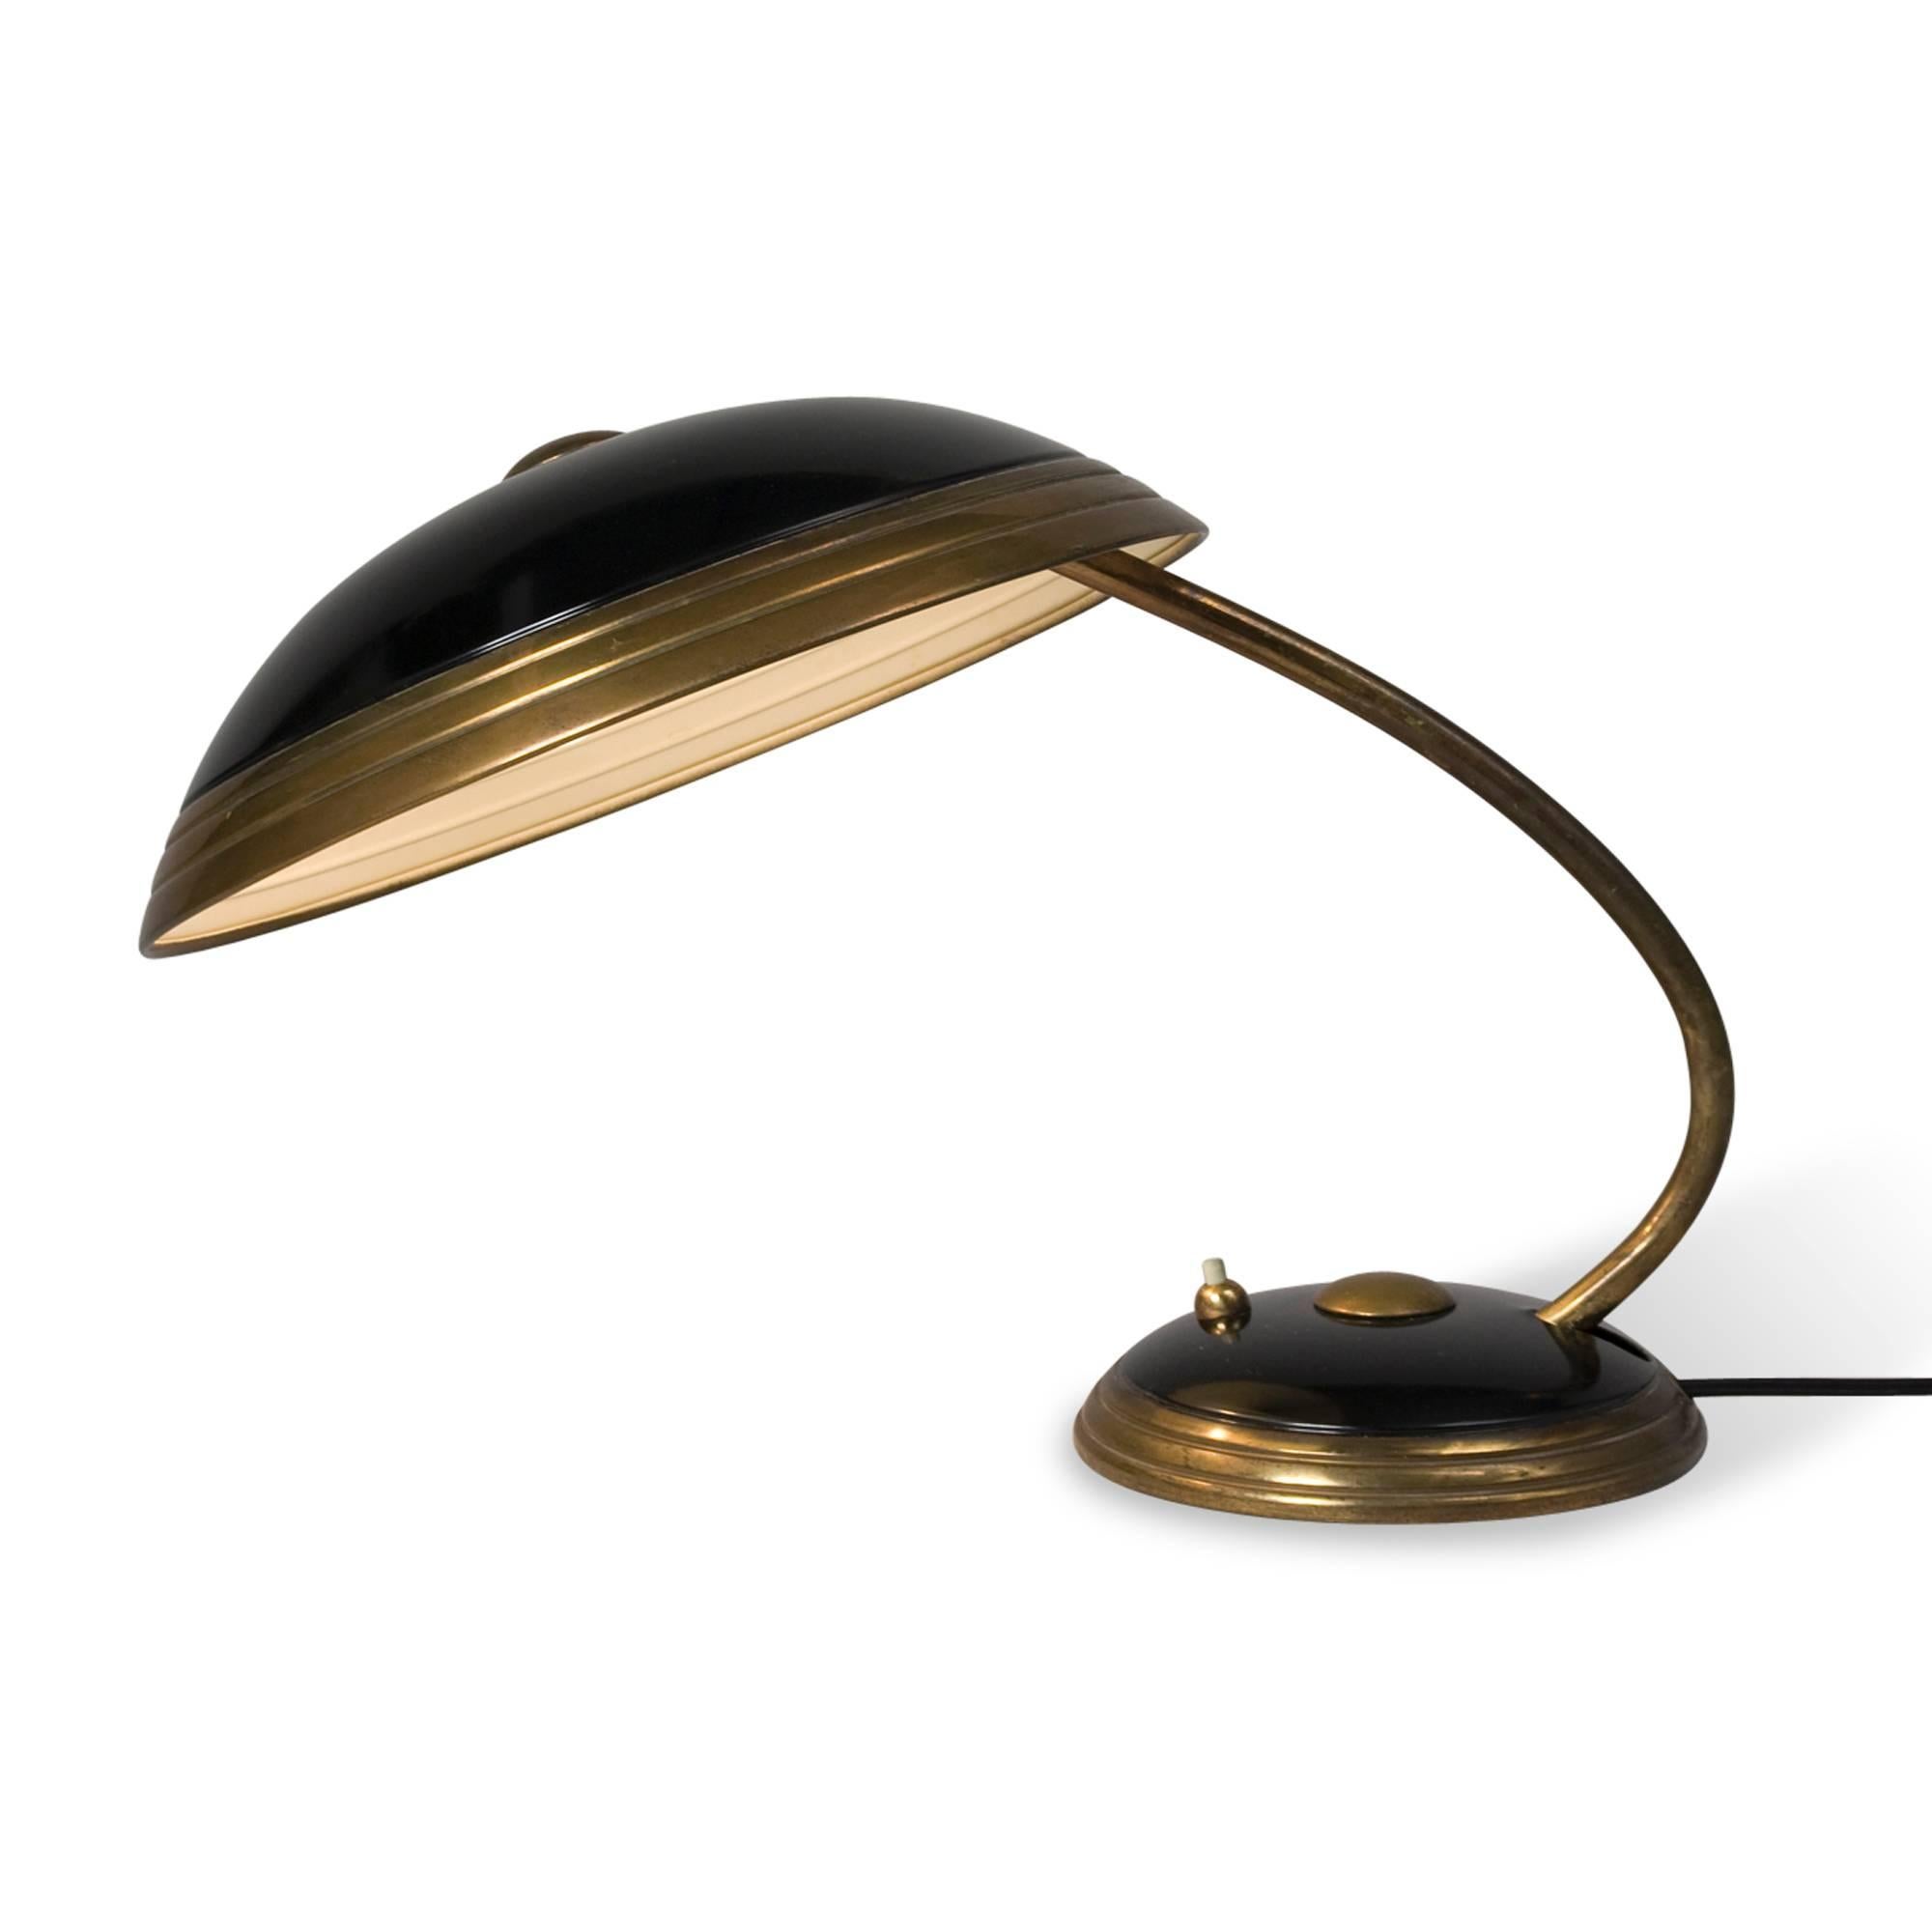 Patinated brass and black lacquered metal dome desk lamp, the shade as well as the arm pivoting up and down by Helo, German, 1950s. Measures: Height 14 in, diameter of shade 12 1/4 in.